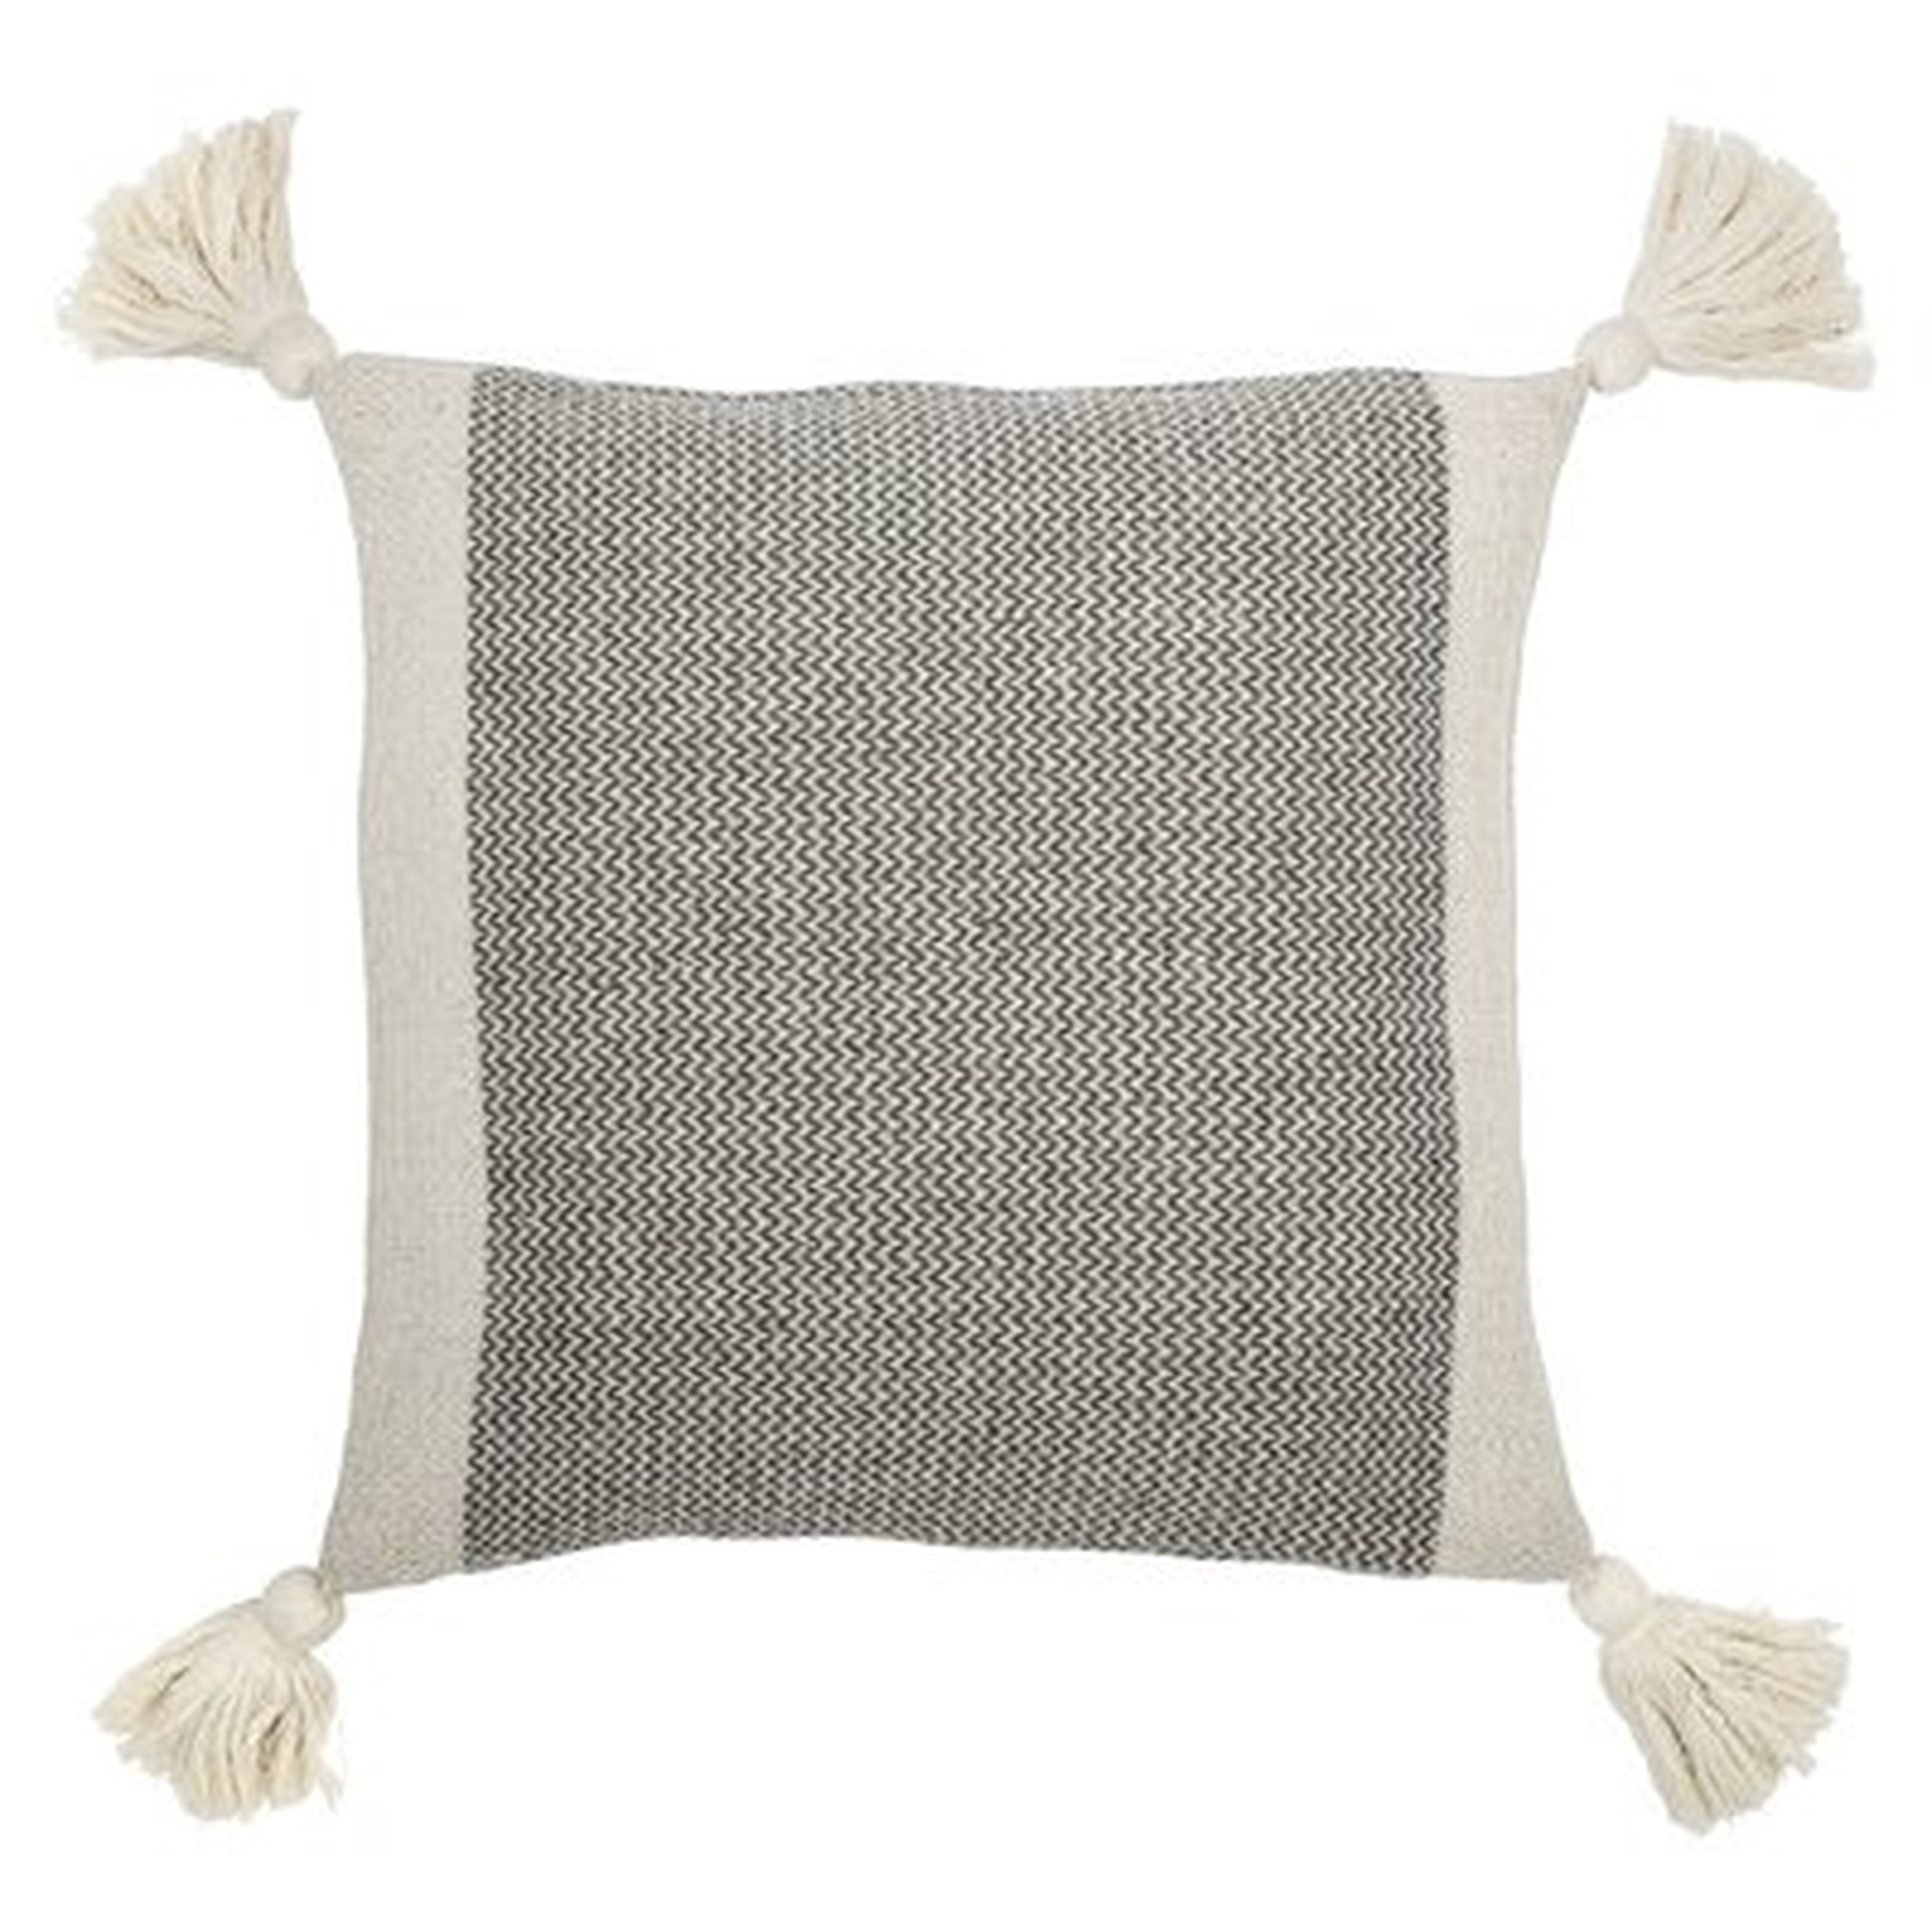 Richeson Square Pillow Cover and Insert GRAY - AllModern